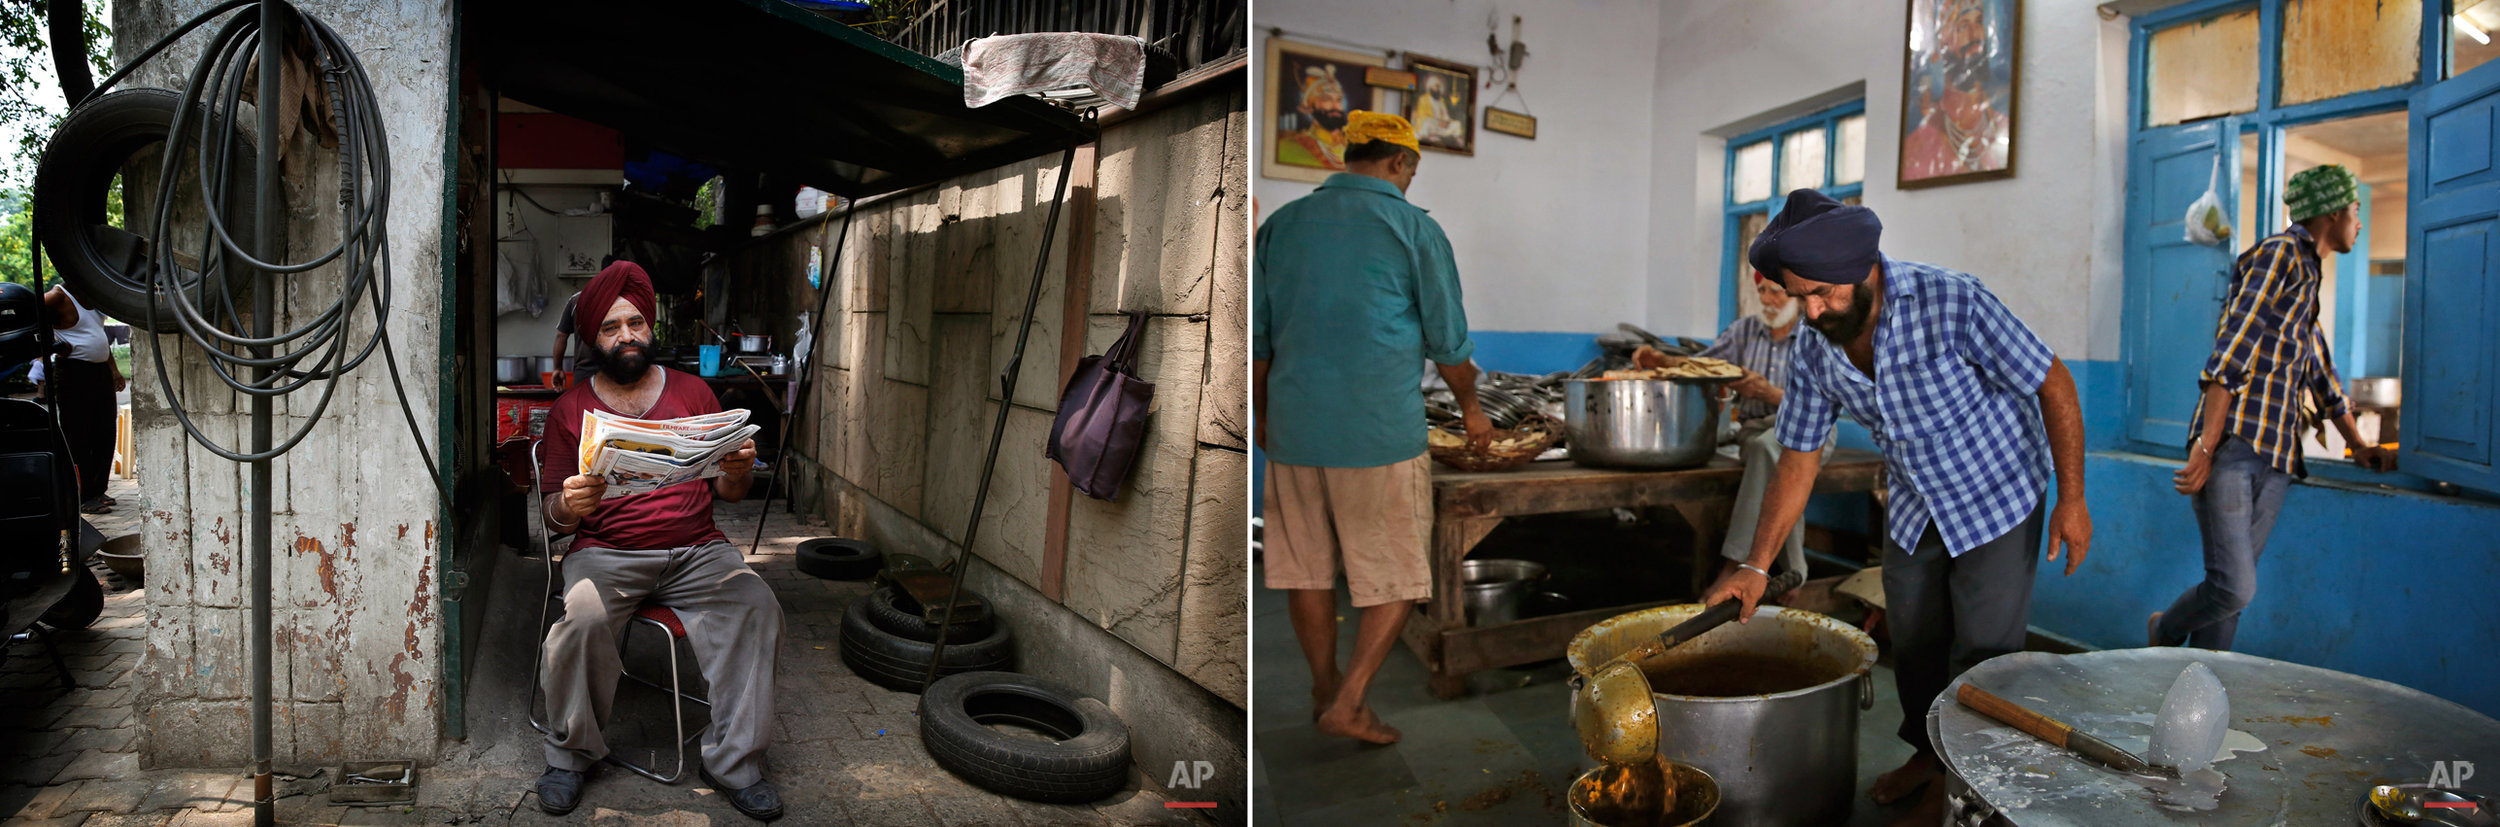  This two picture combo shows on left, Harkerat Singh, a roadside tyre puncture mechanic sits outside his shop, in New Delhi, India, on June 16, 2015, as on right, he serves lentils during langar at the Majnu-Ka-Tila Gurdwara or Sikh temple, in New D